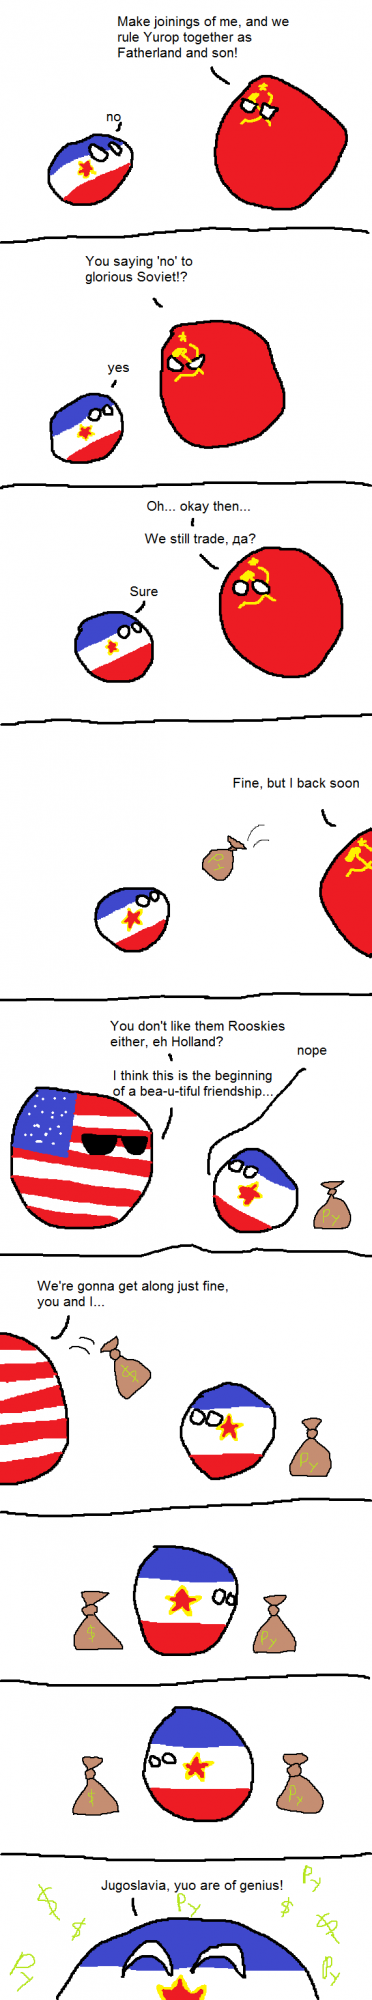 More of the Countryballs